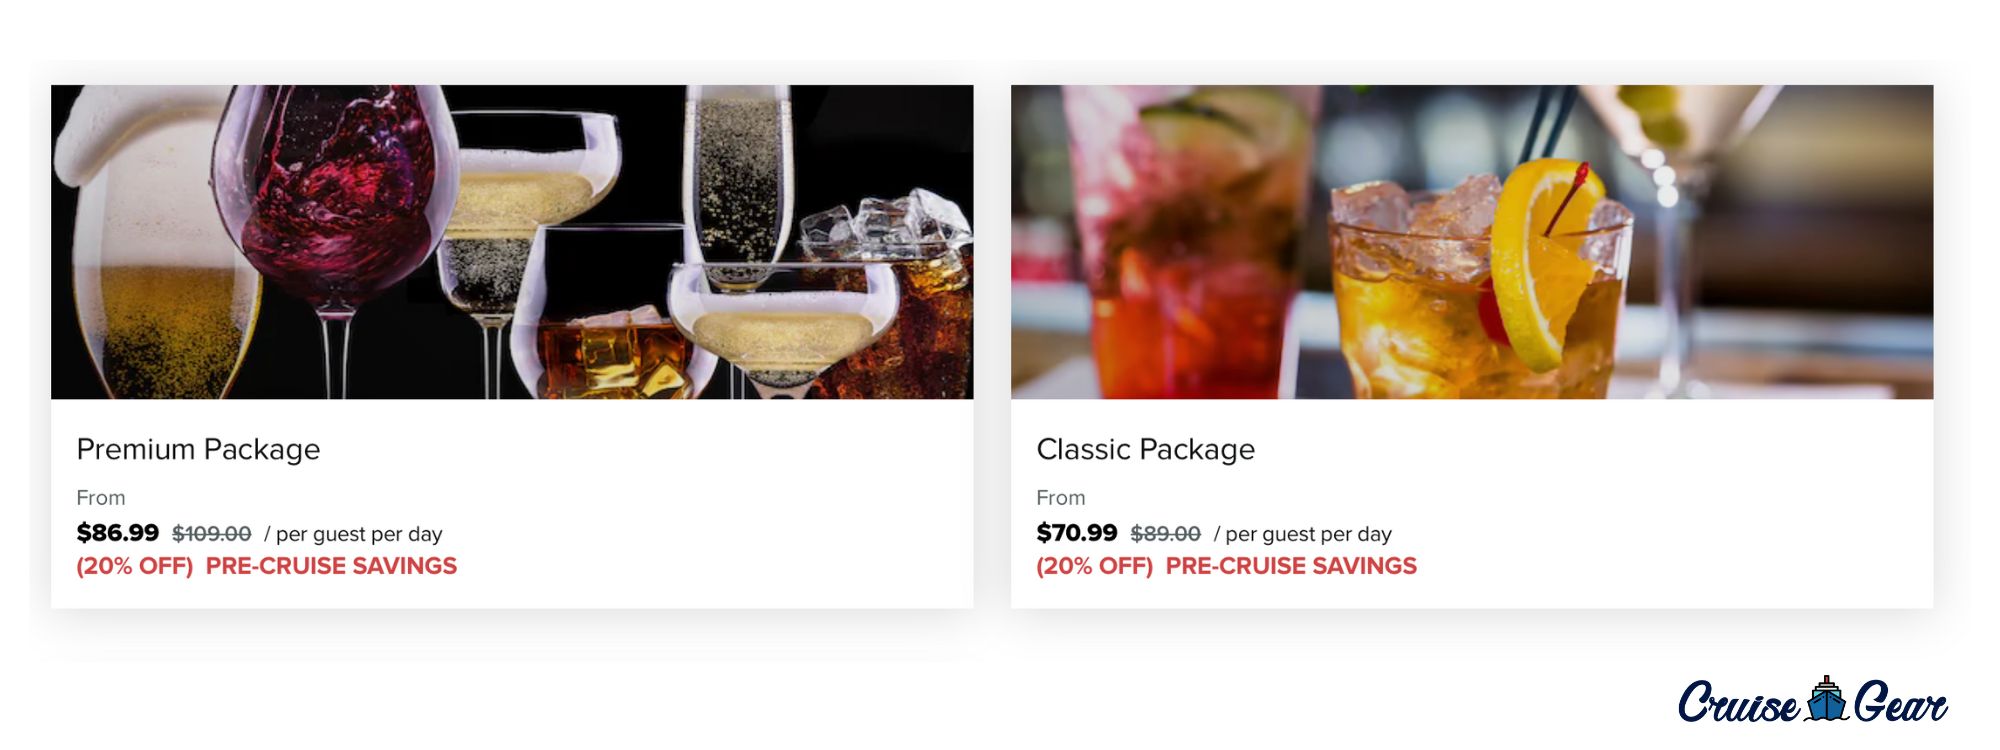 Celebrity Cruises Drink Packages